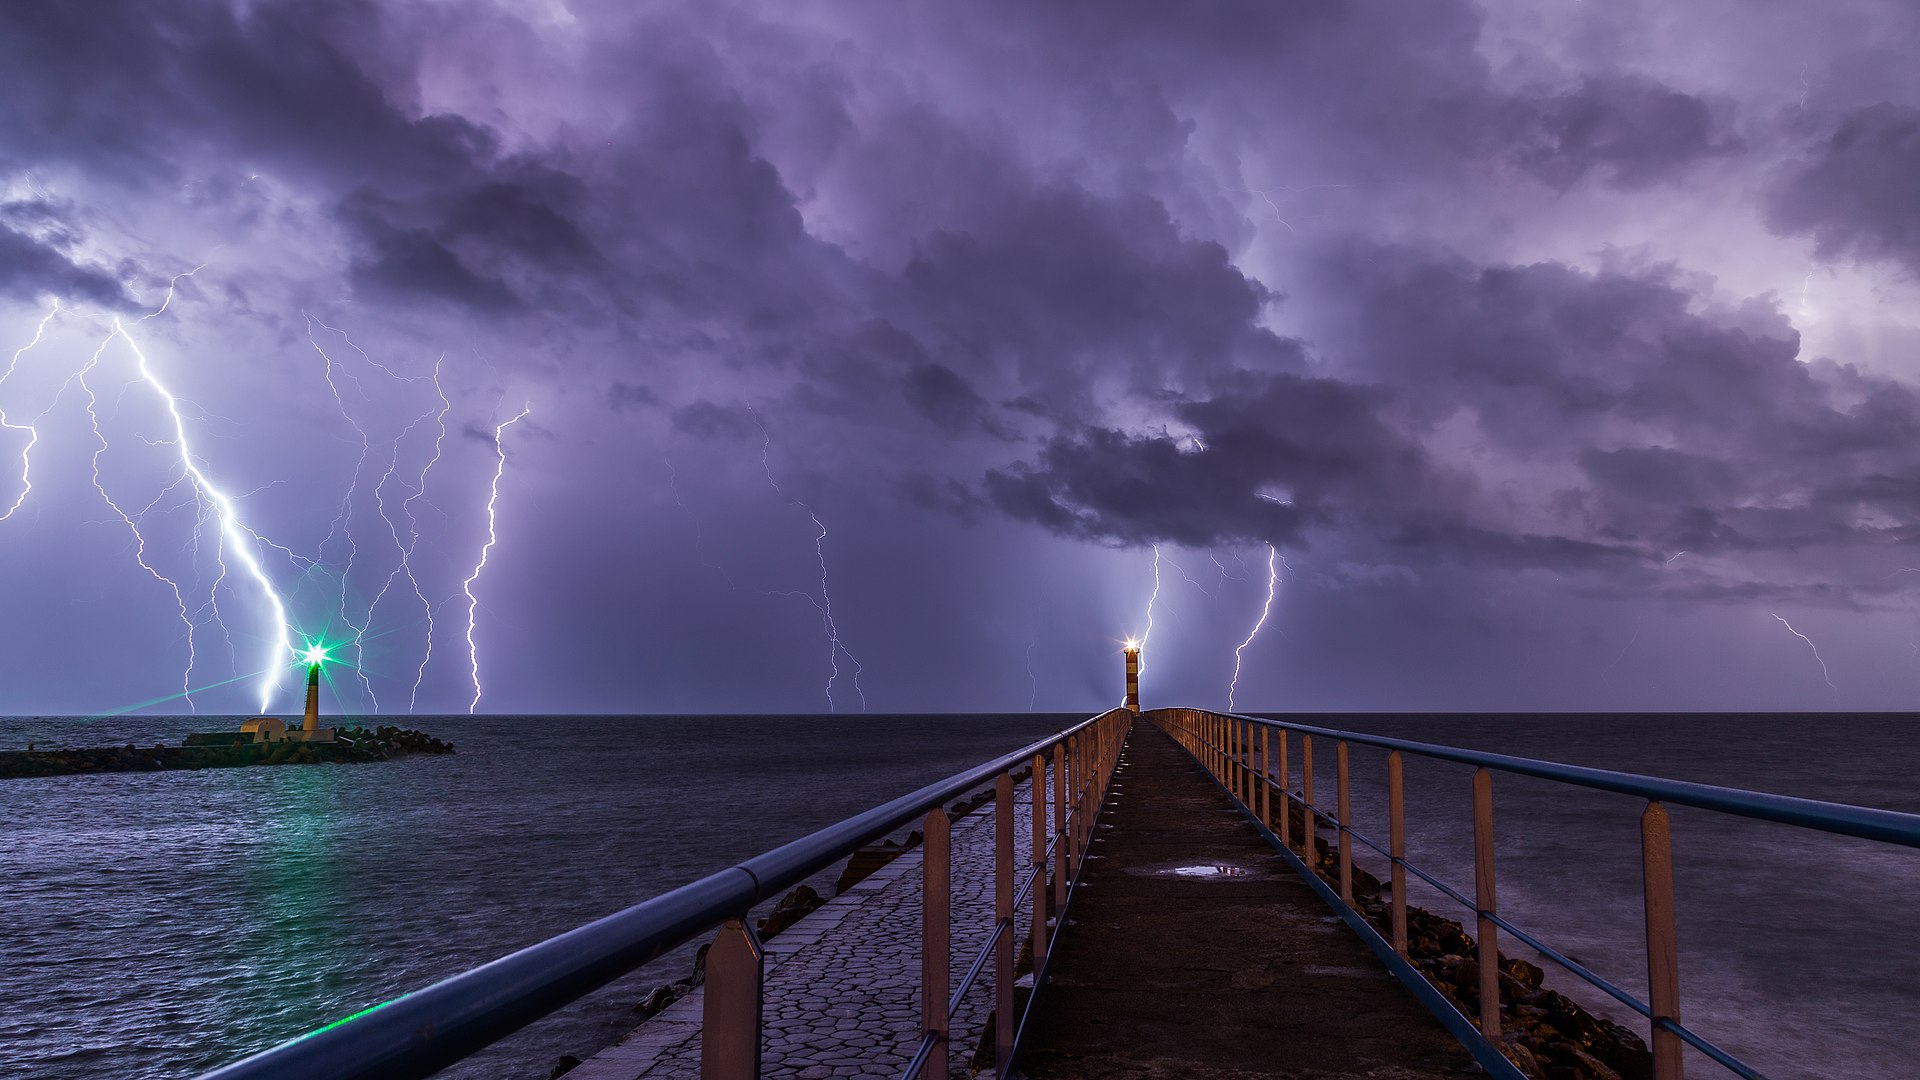 By Maxime Raynal from France - Orage PLN, CC BY 2.0,